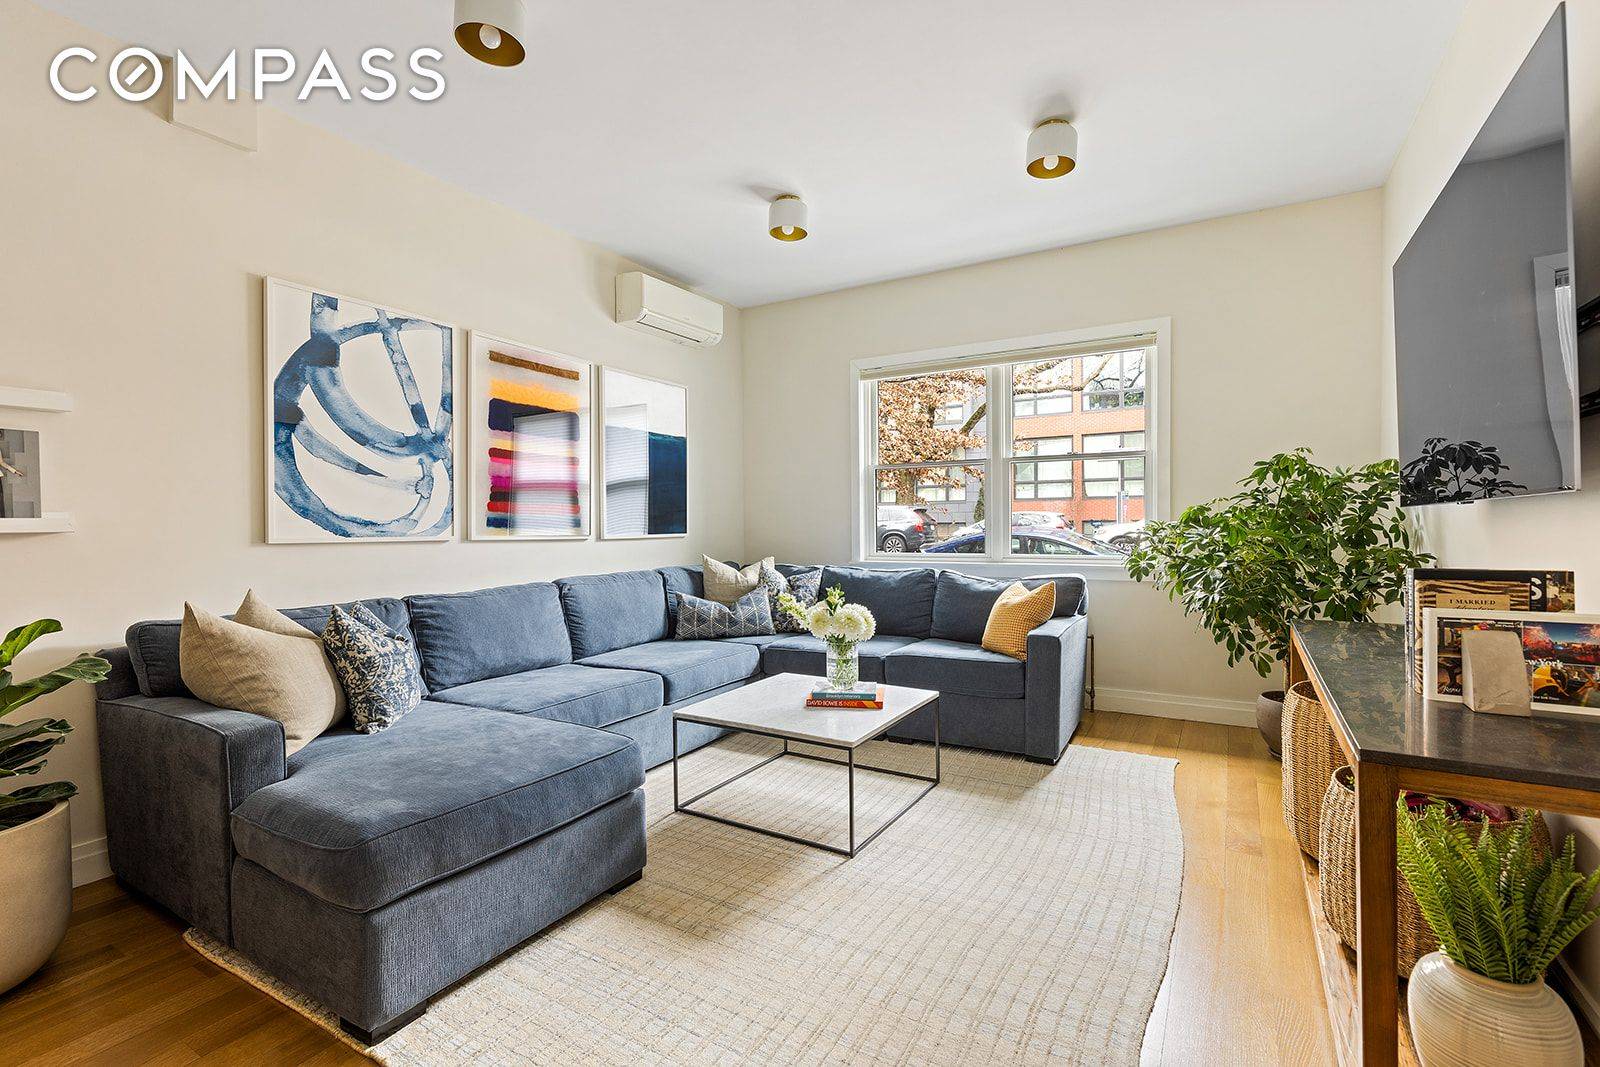 682A 6th Avenue is a modern, fully renovated two family home on the border of South Slope and Greenwood Heights.